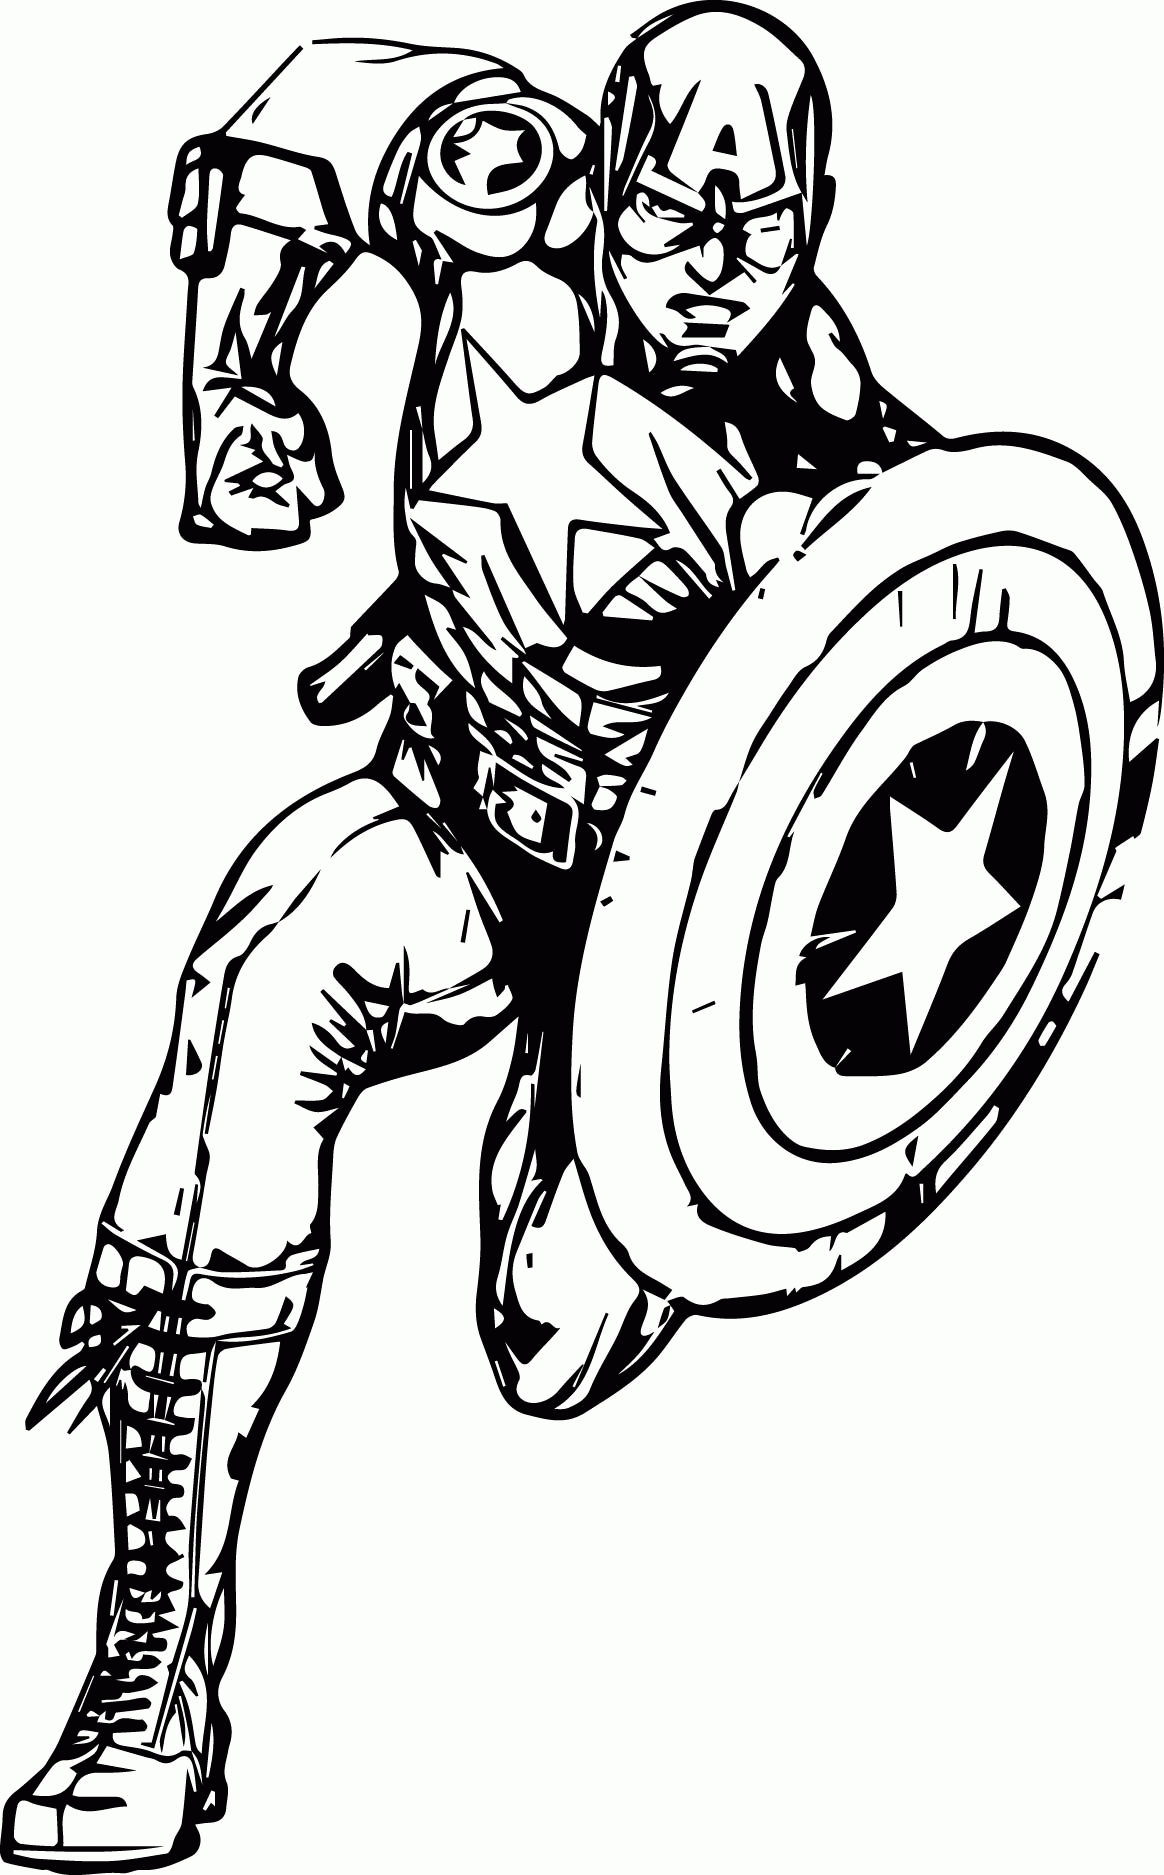 Avengers_captain_america_coloring_page | Wecoloringpage